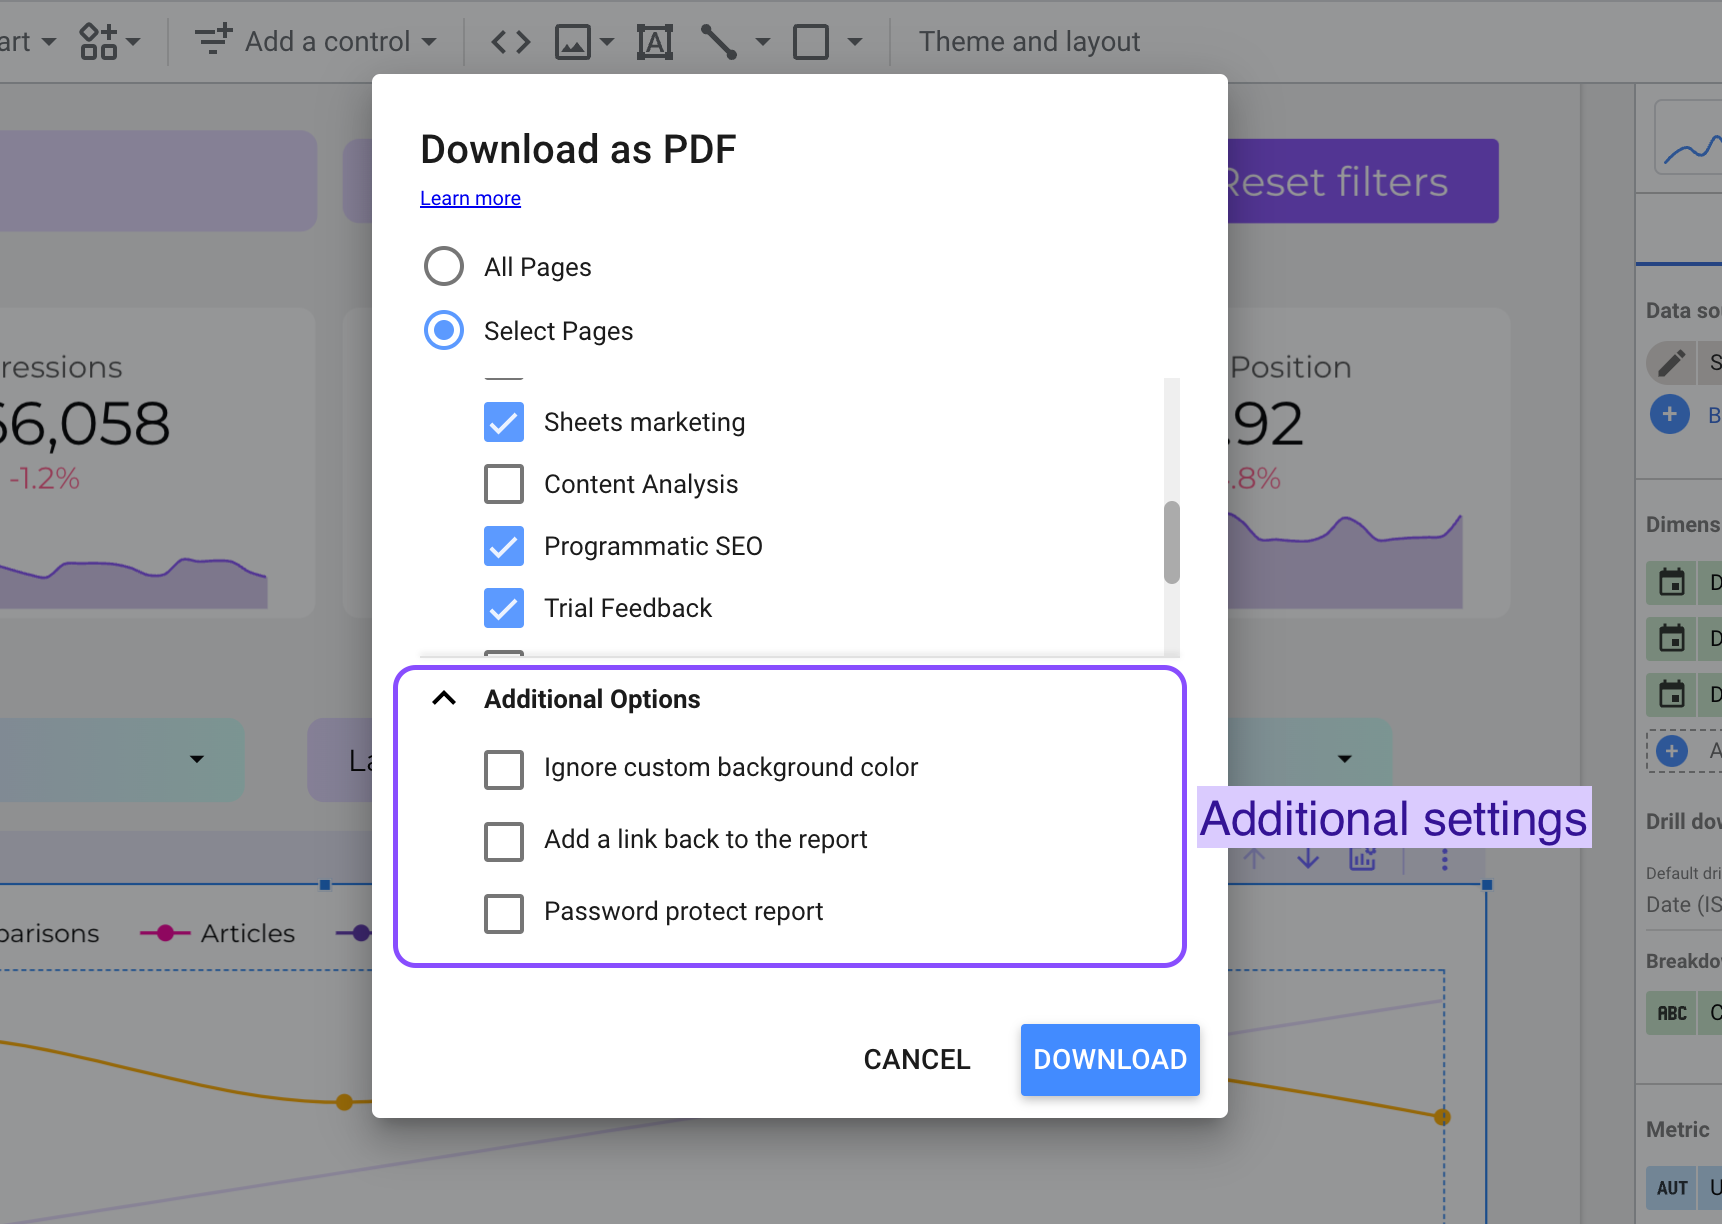 Select Pages to download as a PDF